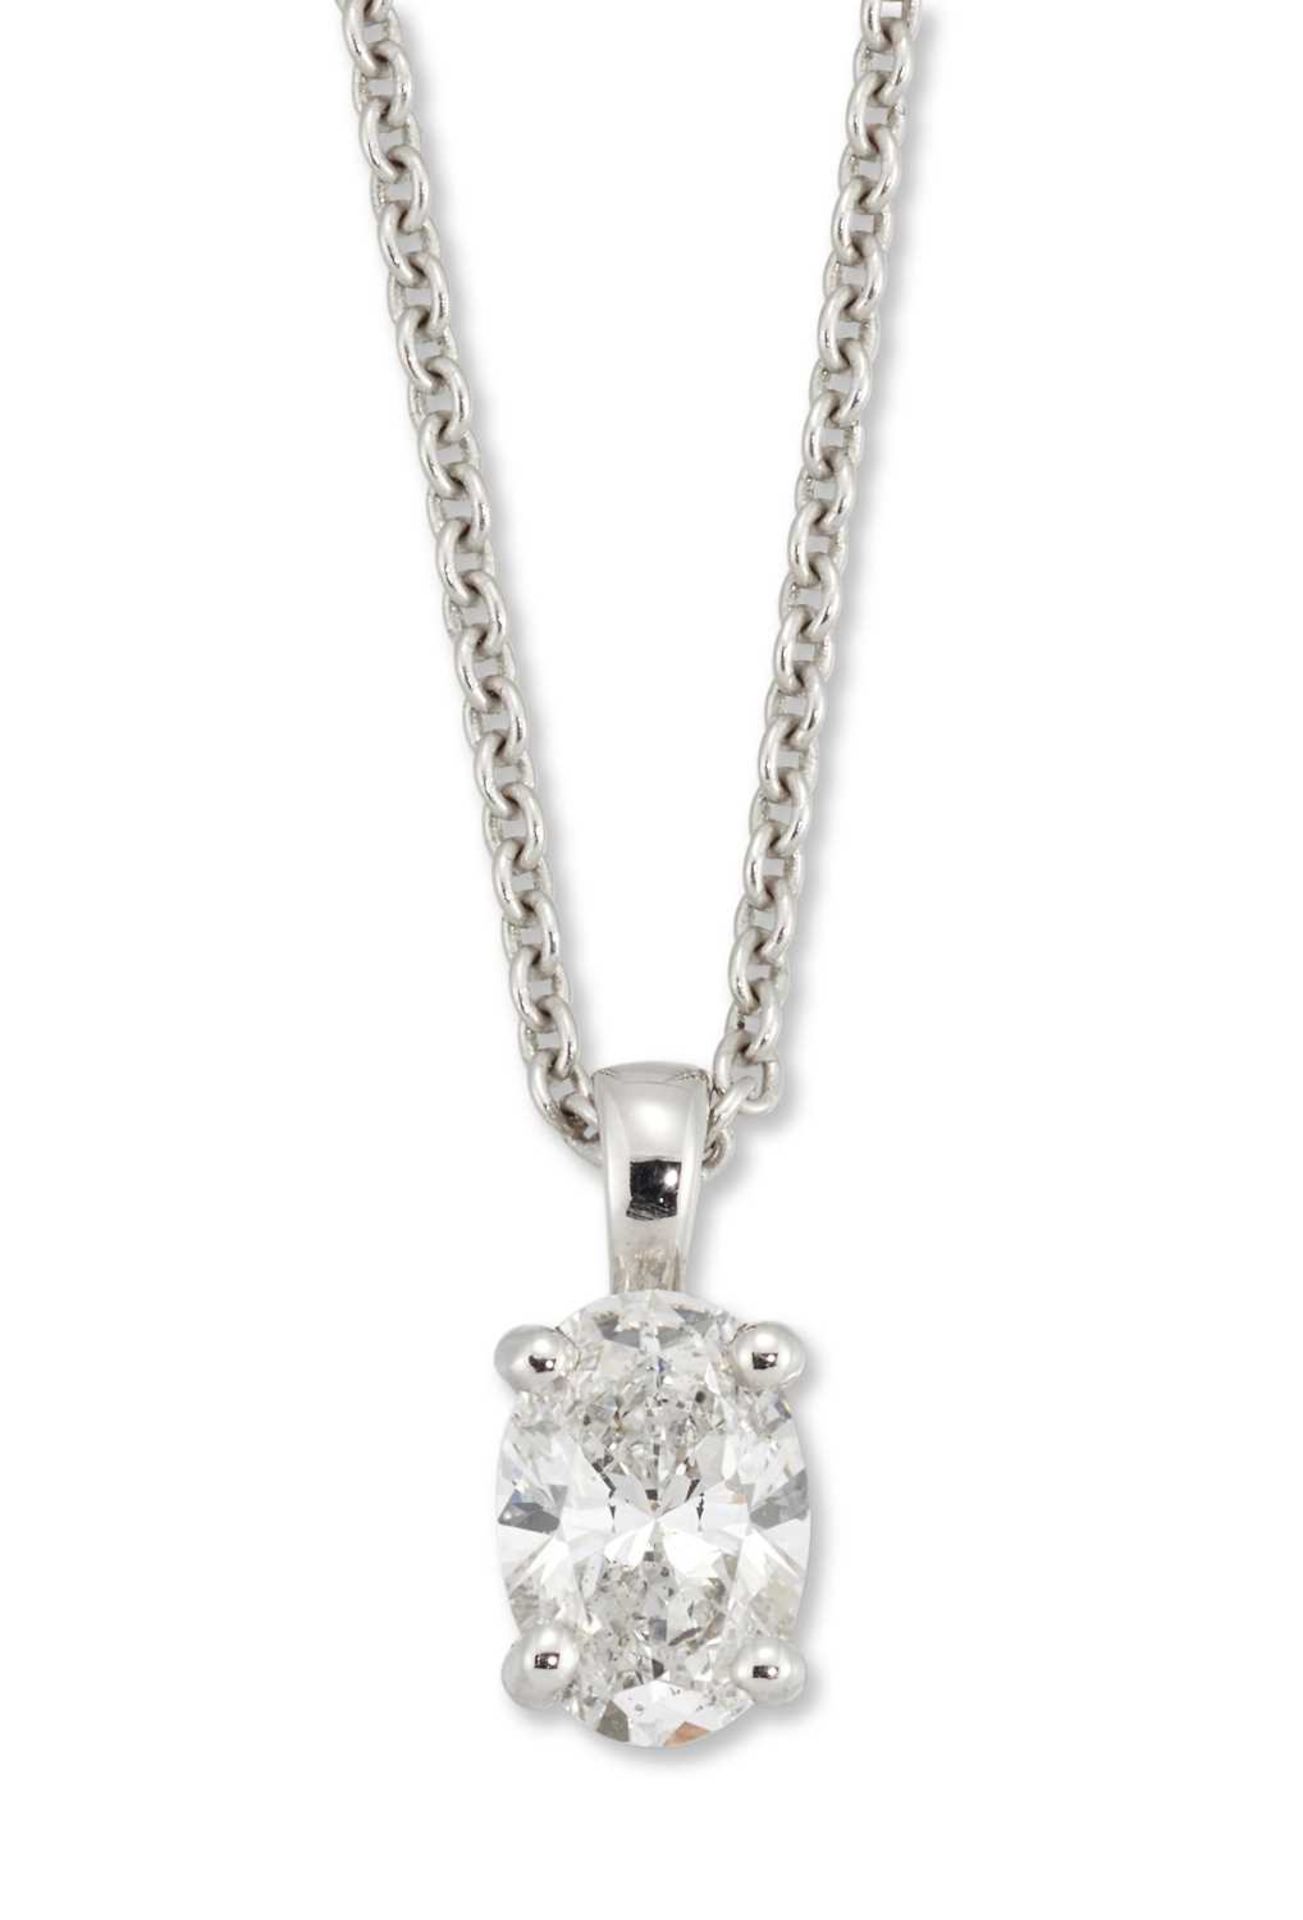 A SOLITAIRE OVAL-CUT DIAMOND PENDANT ON AN 18 CARAT WHITE GOLD CHAIN